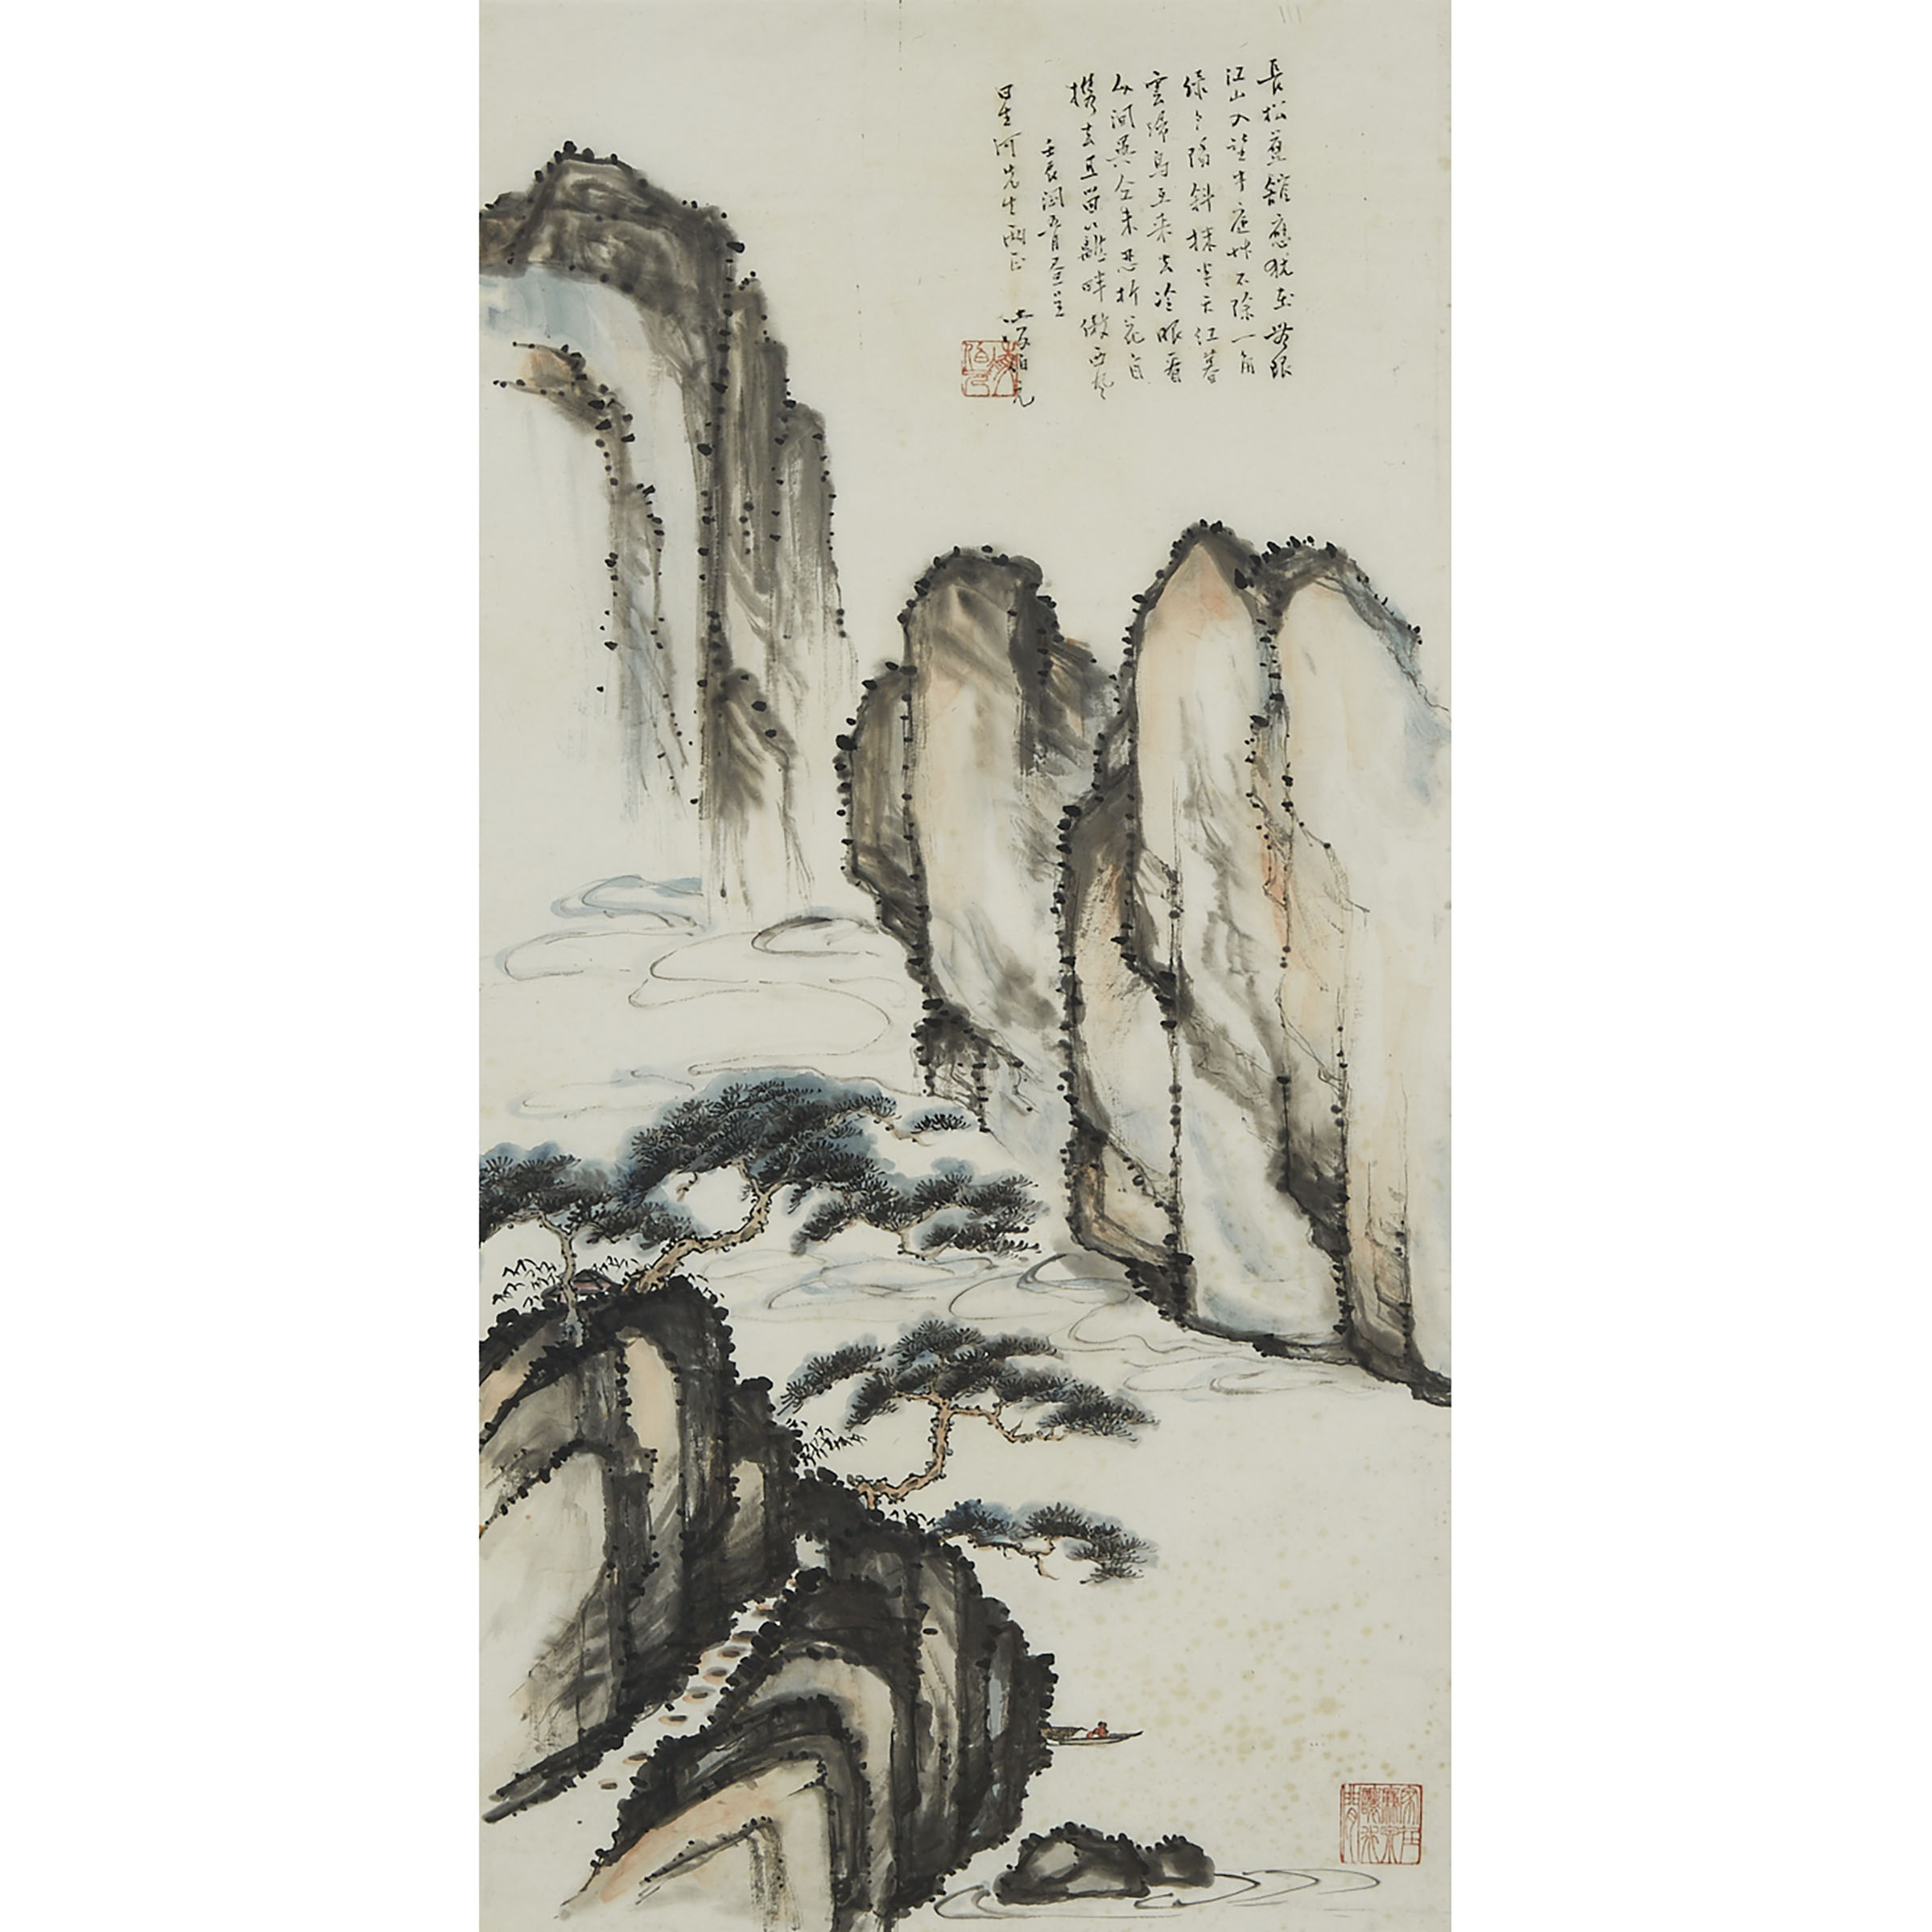 A Large Chinese Landscape Painting, Signed Ling Boyuan, Cyclically Dated to 1952